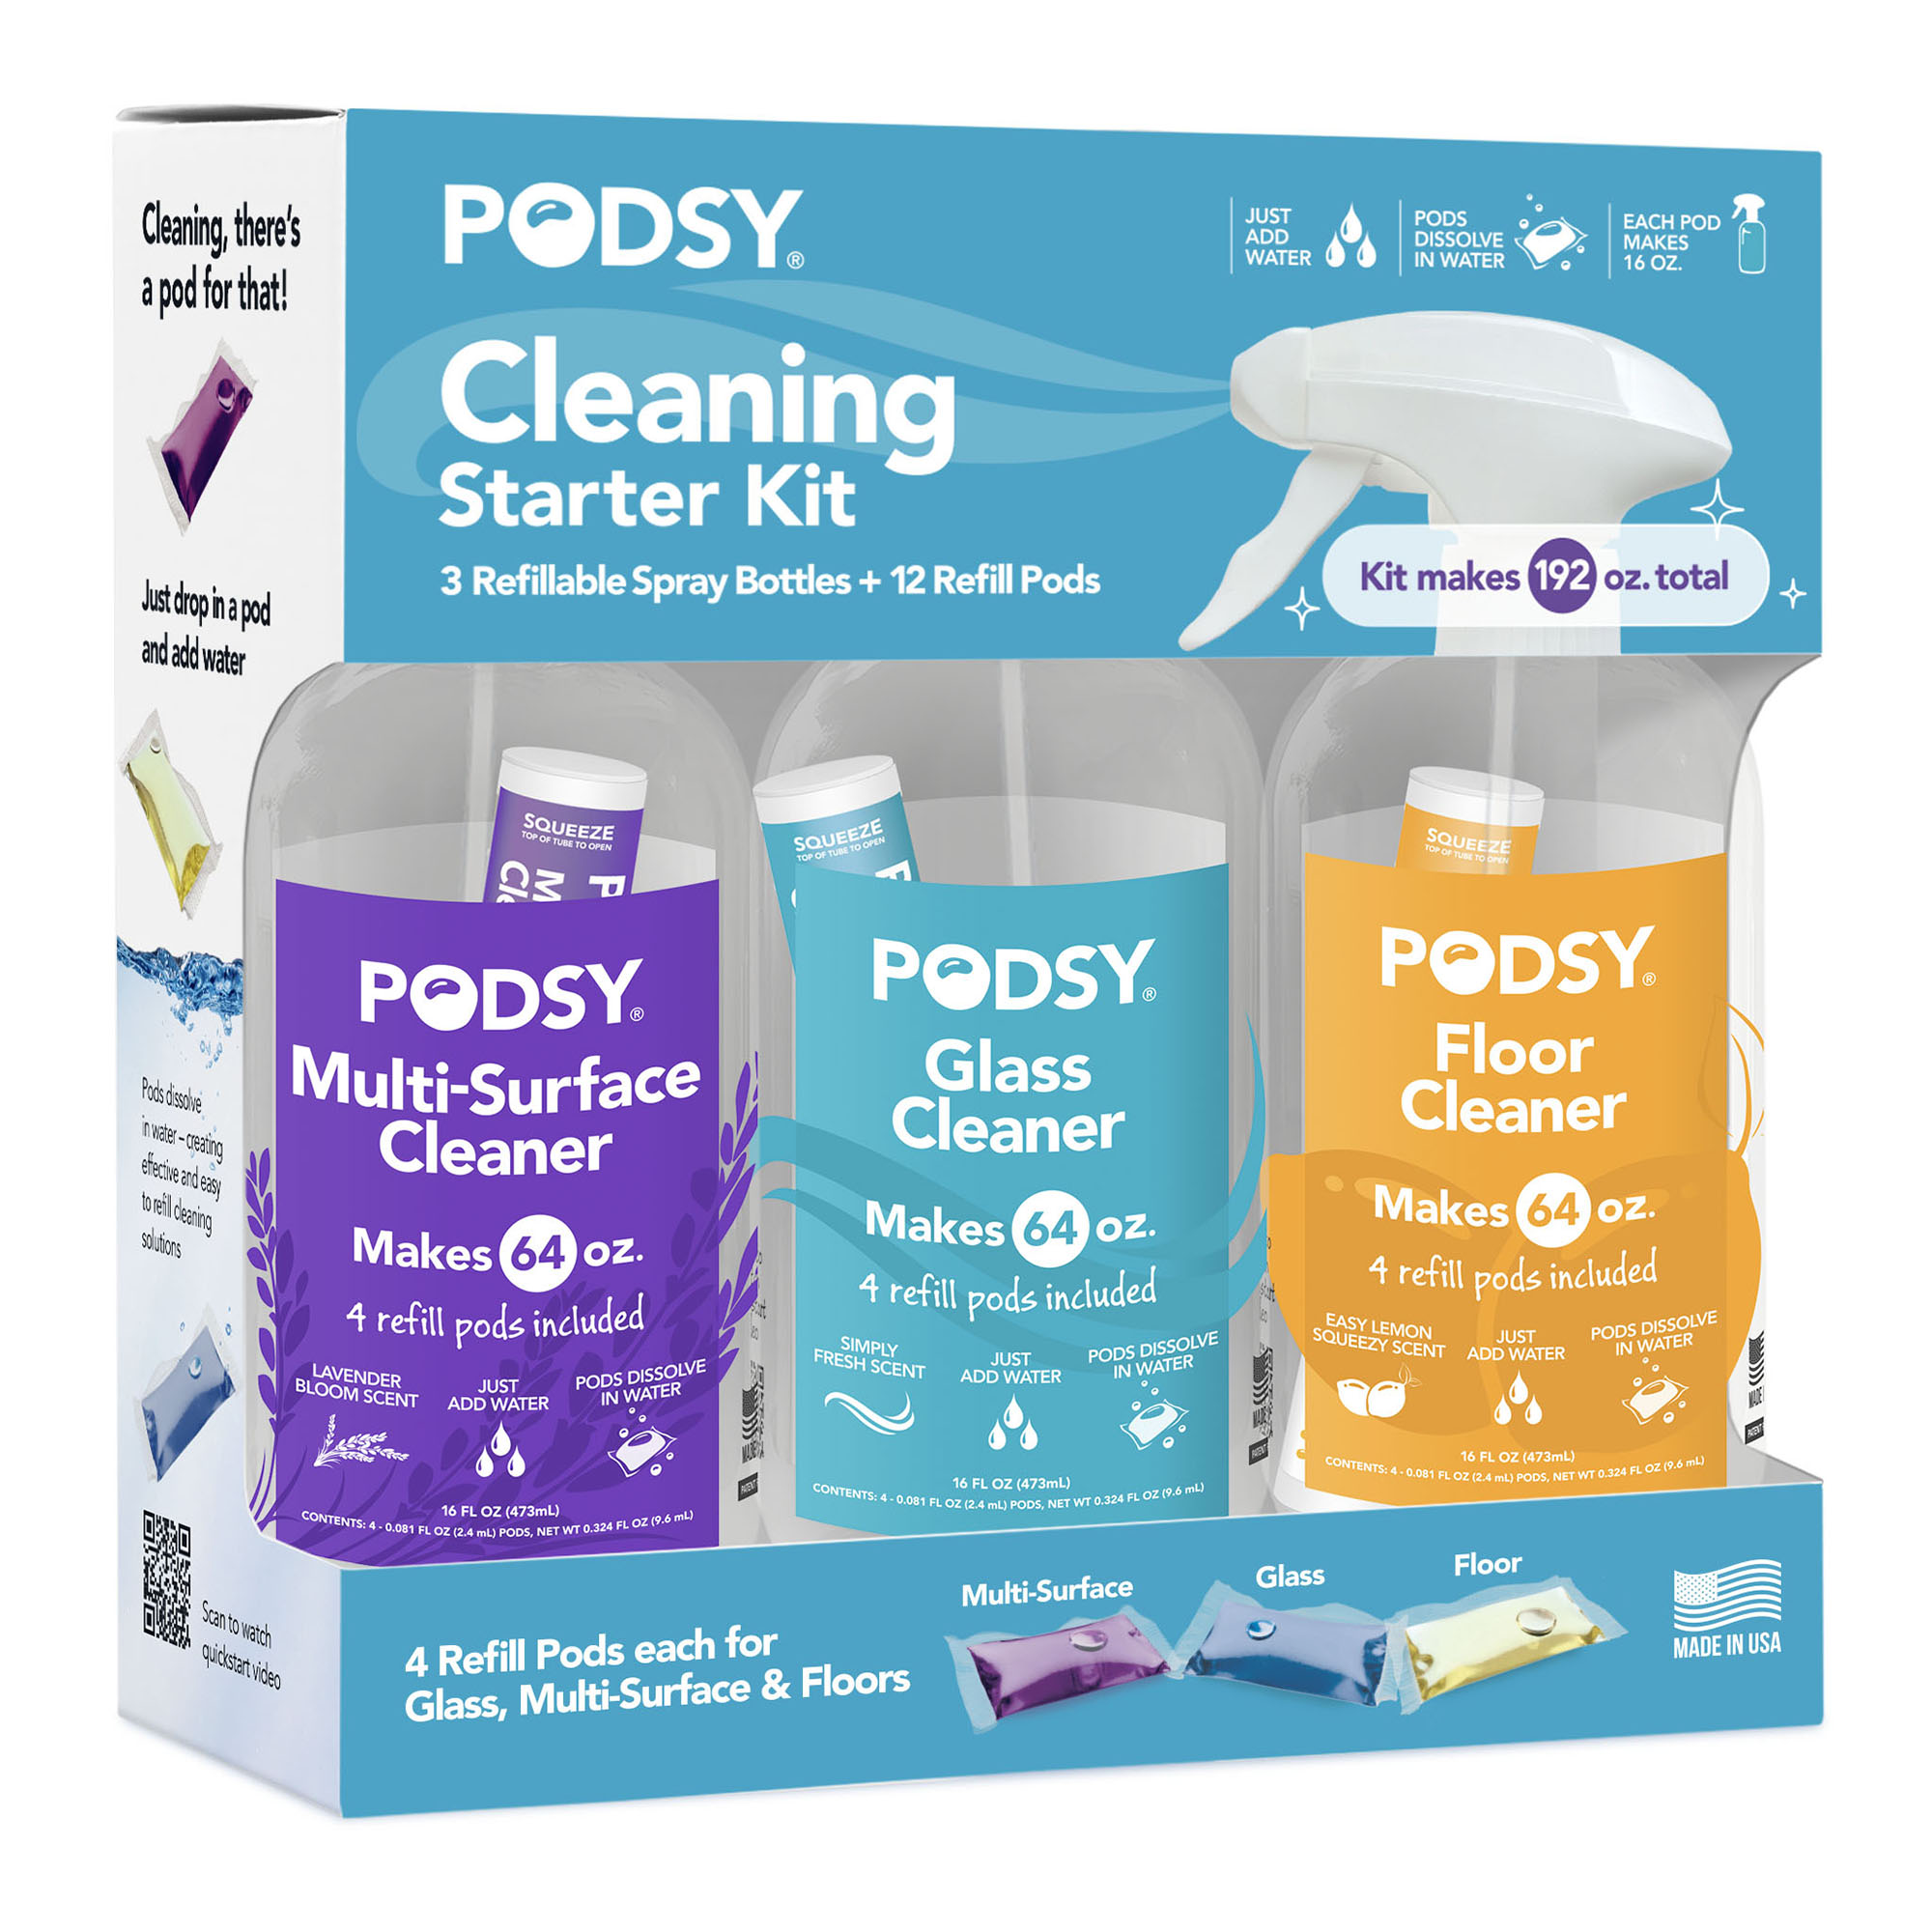 Podsy Cleaning Starter Kit-3 Refillable Spray Bottles for Multi-Surface, Glass & Floor Cleanings. 4 Cleaning Refill Pods in Child-Resistant Tube in